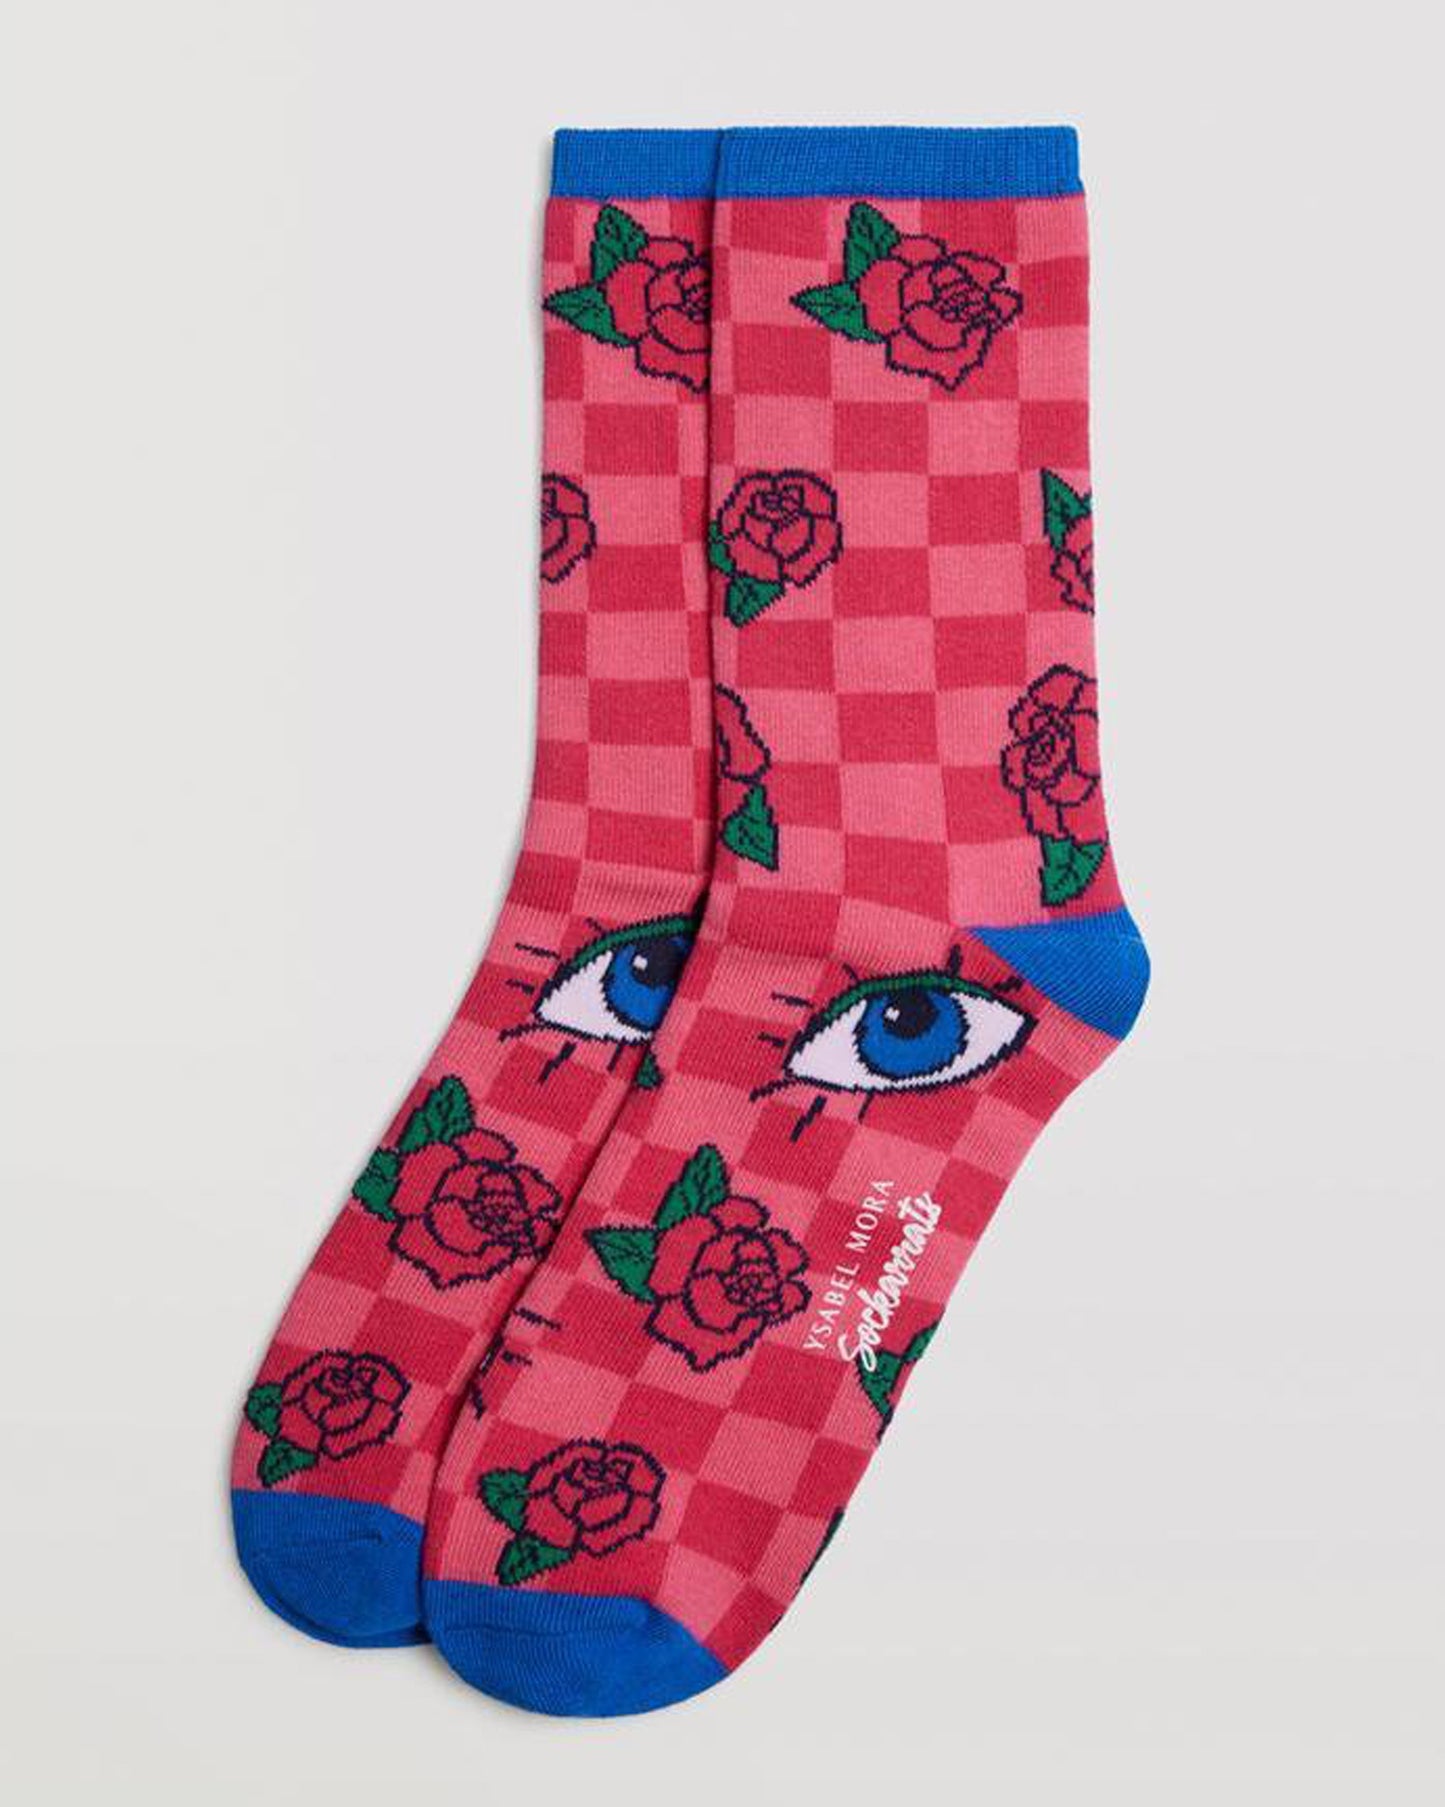 Ysabel Mora 12906 Checkered Rose Socks - Two toned pink cotton crew length ankle socks with a rose and eyes pattern, blue cuff, toe and heel.